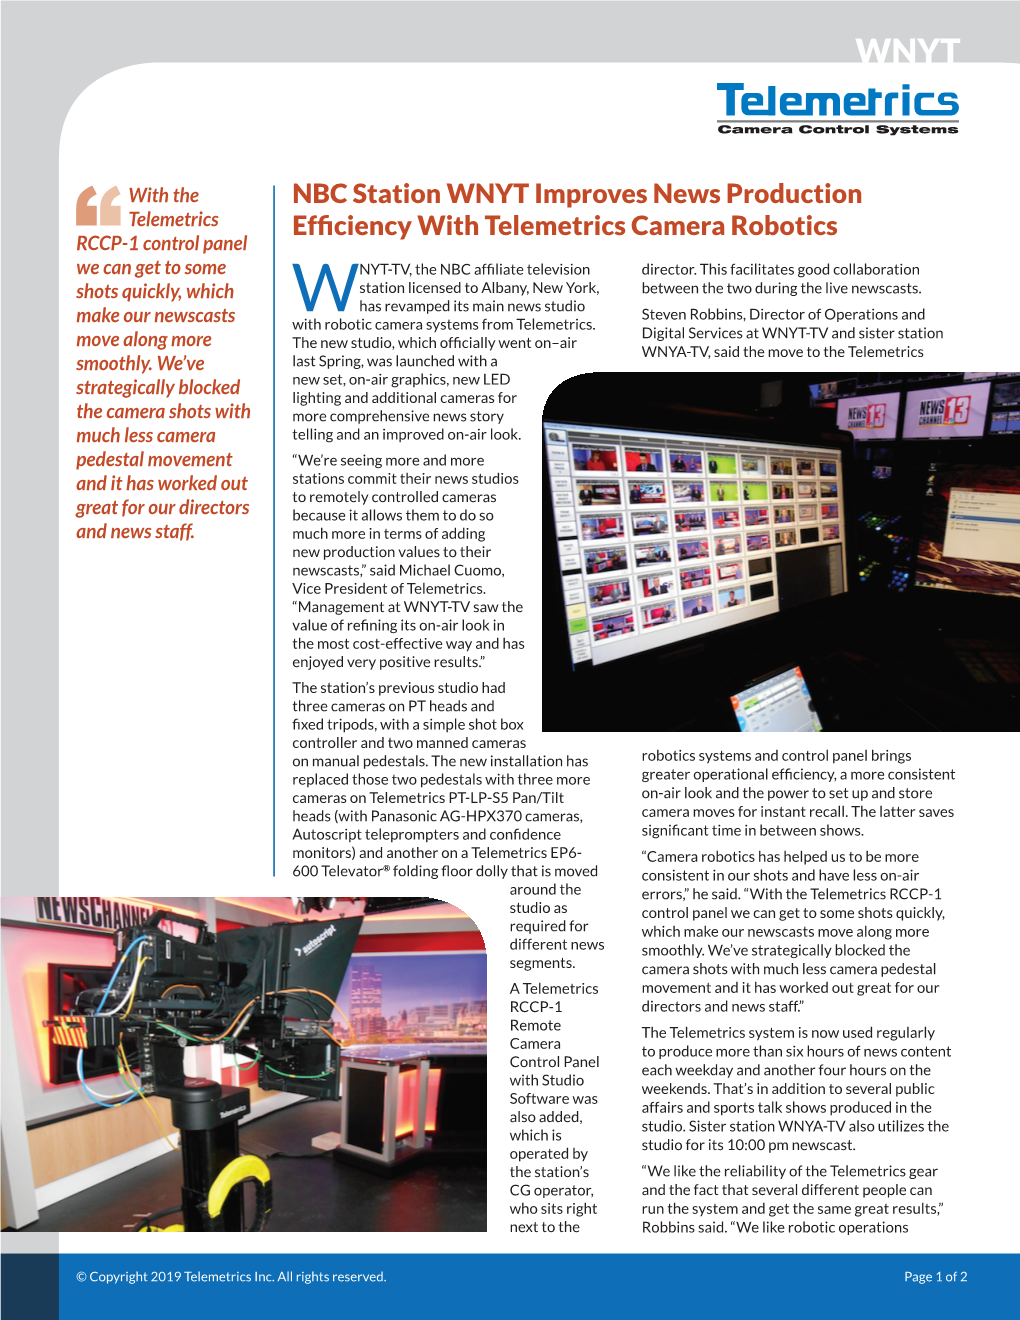 NBC Station WNYT Improves News Production Efficiency With